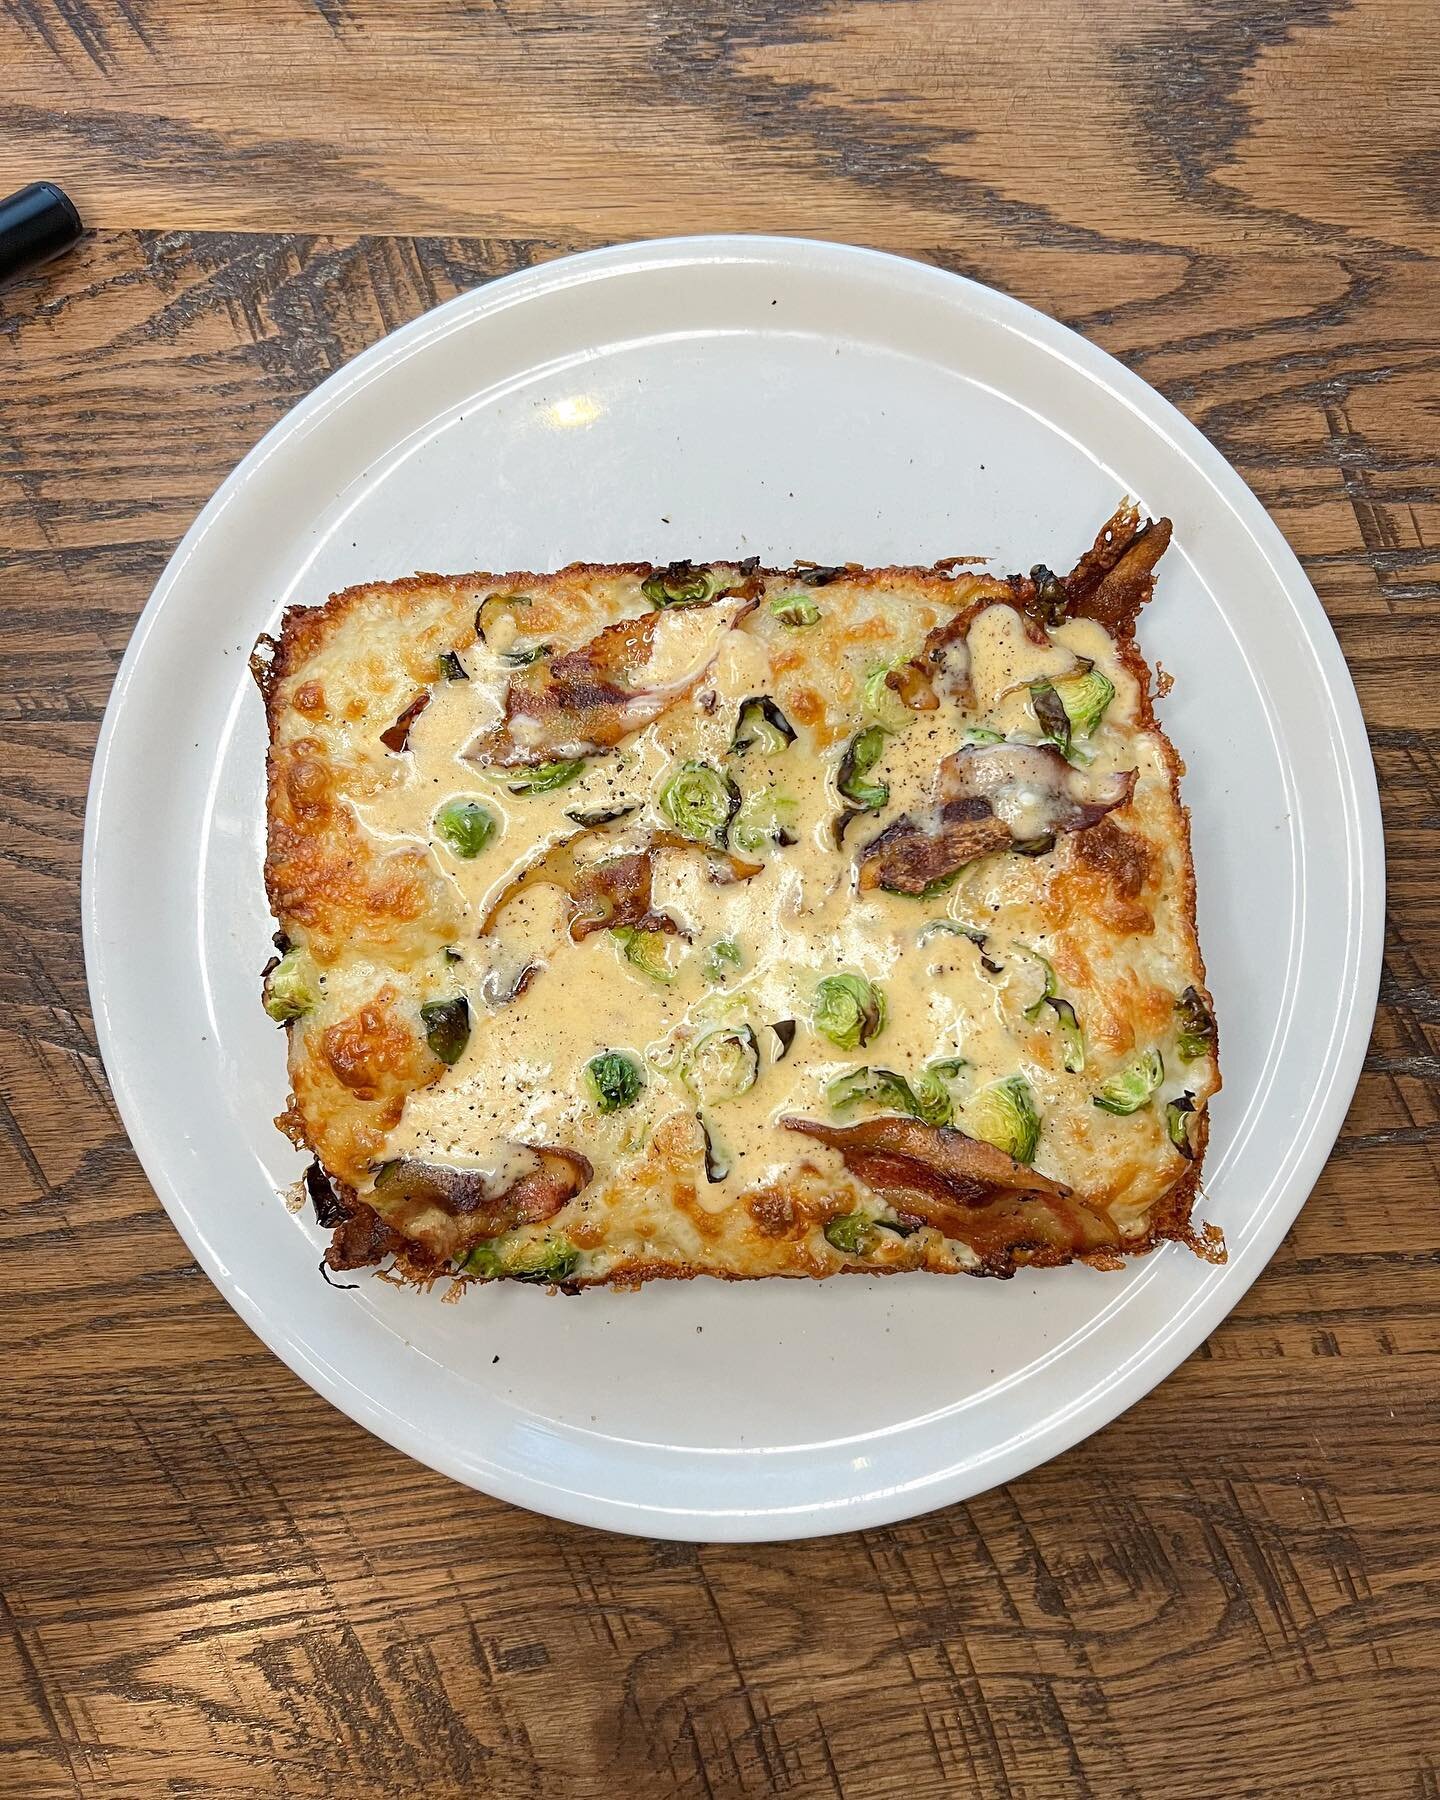 Sprout square is here! 

&bull;Cheese Blend, Plato Dale Farm Brussels Sprouts, Tempesta Guanciale, Parmigiano Fonduta